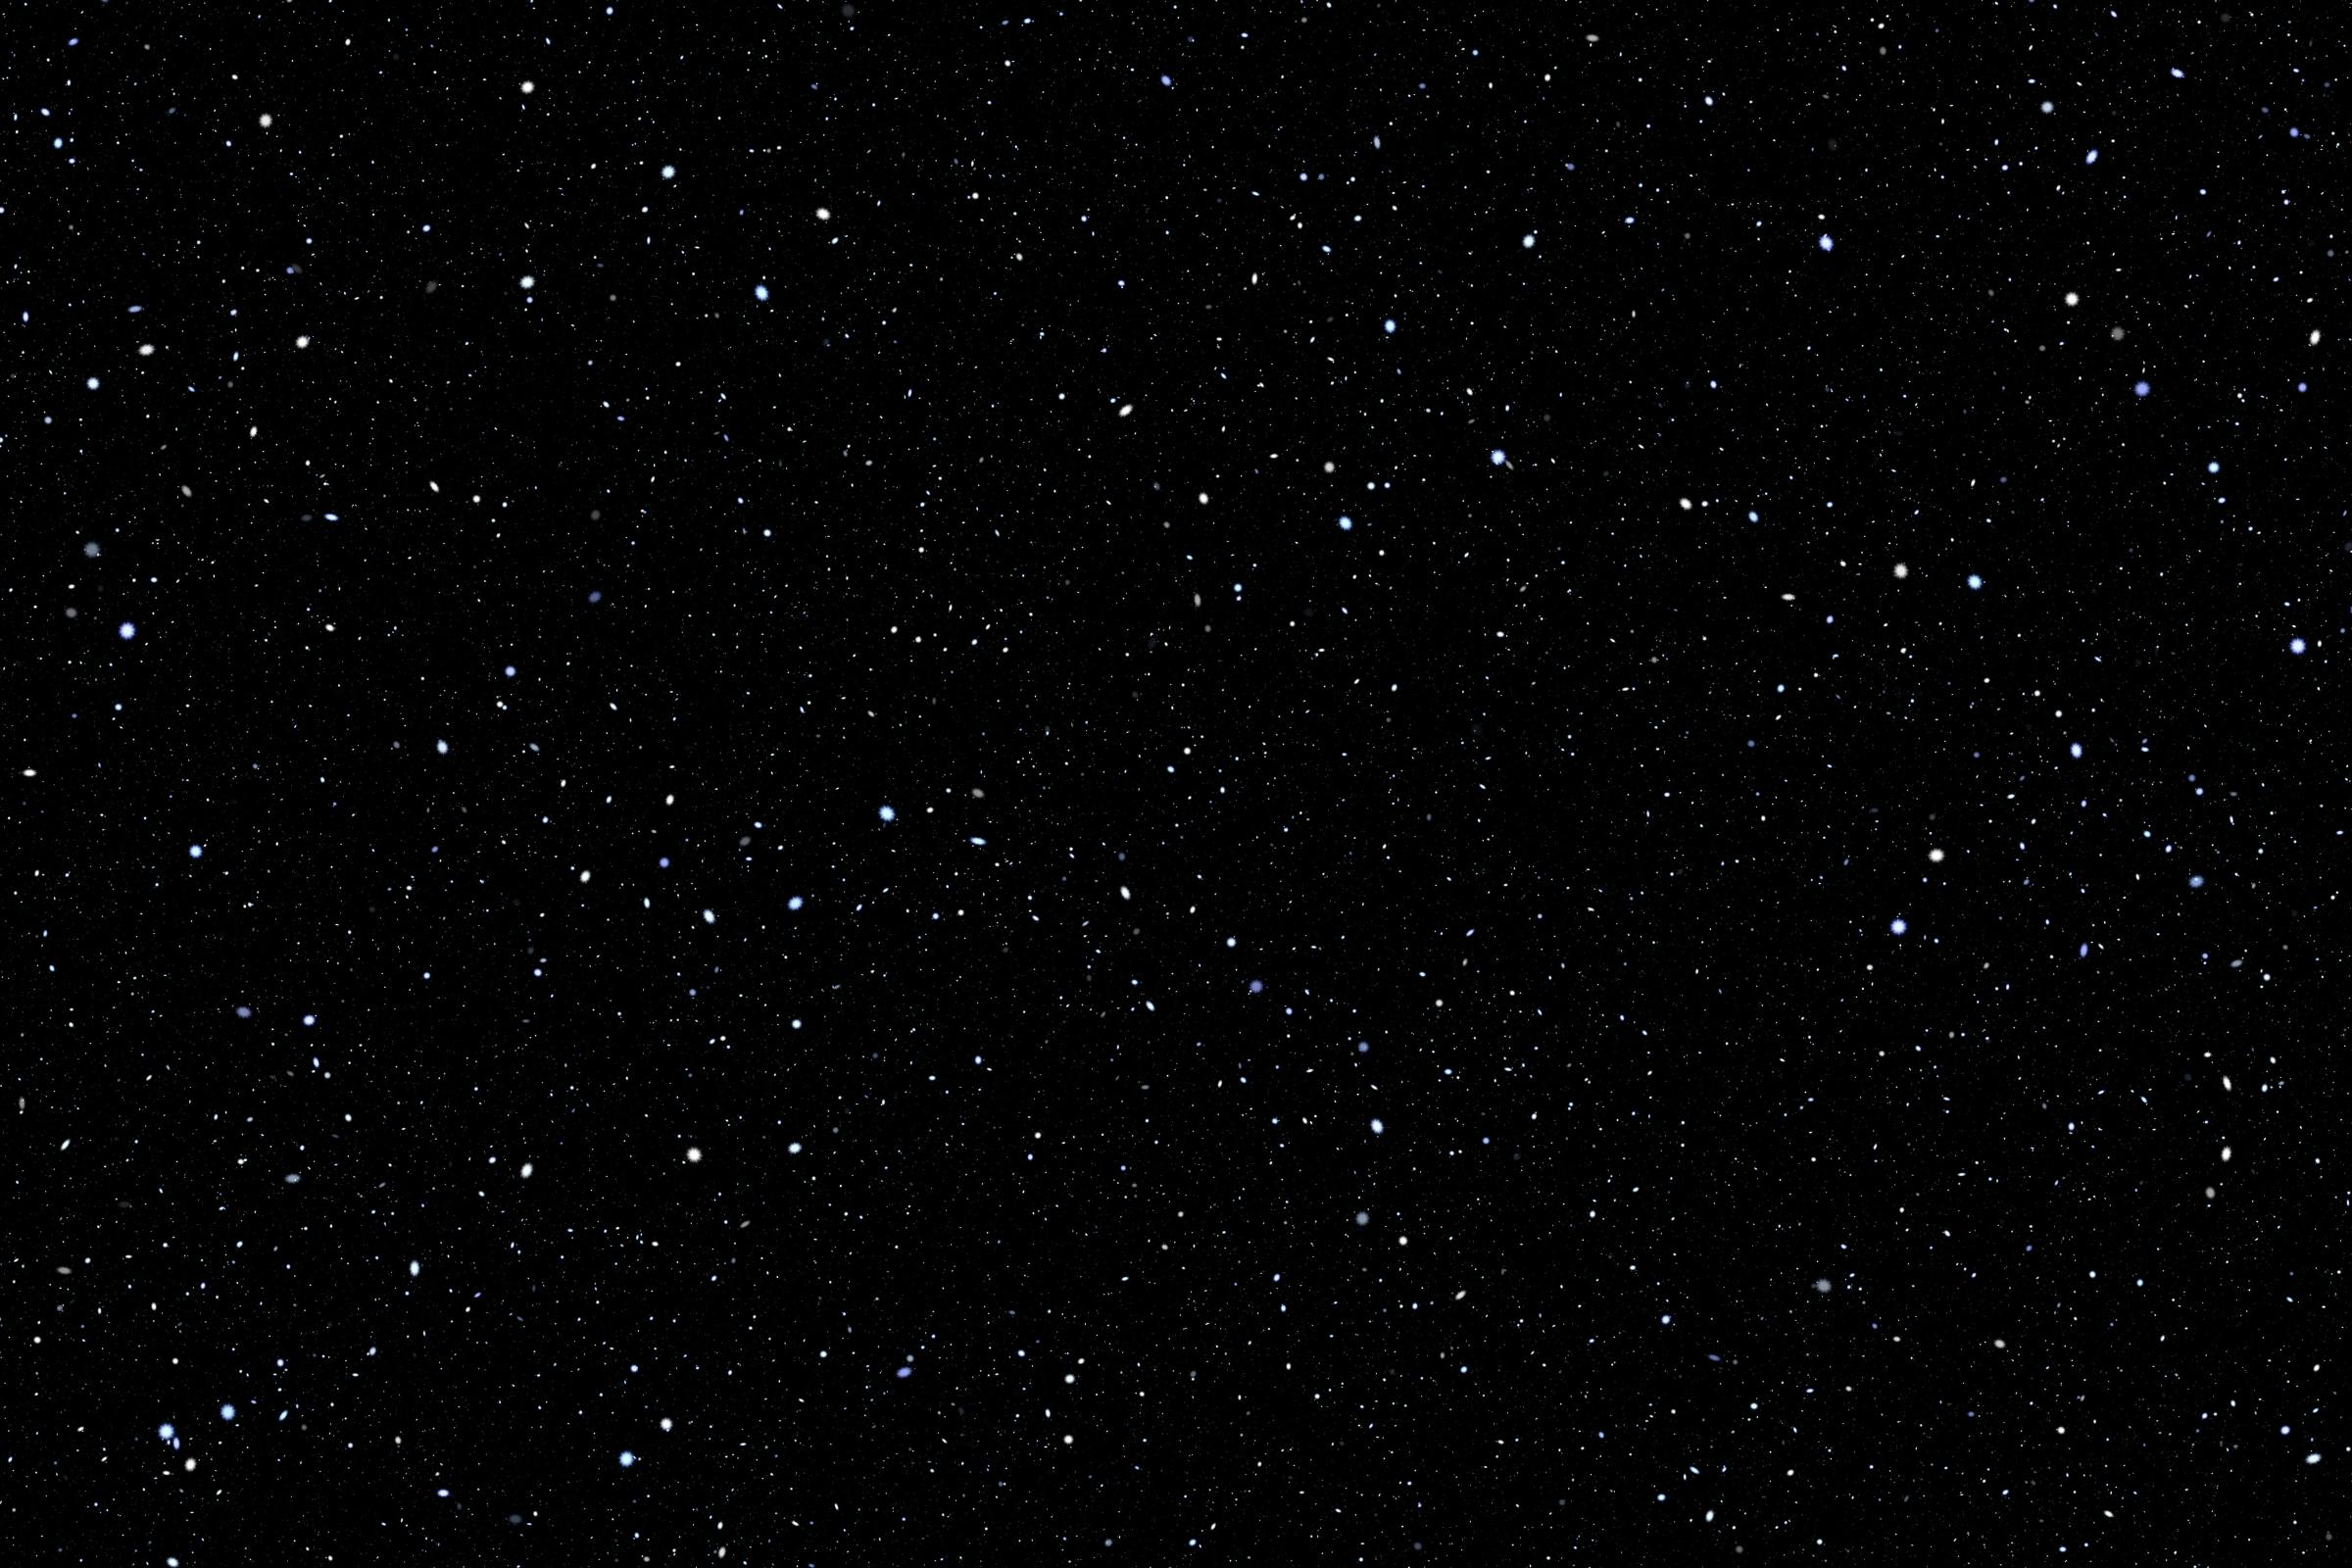 Realistic space sky which is black with stars scattered across.